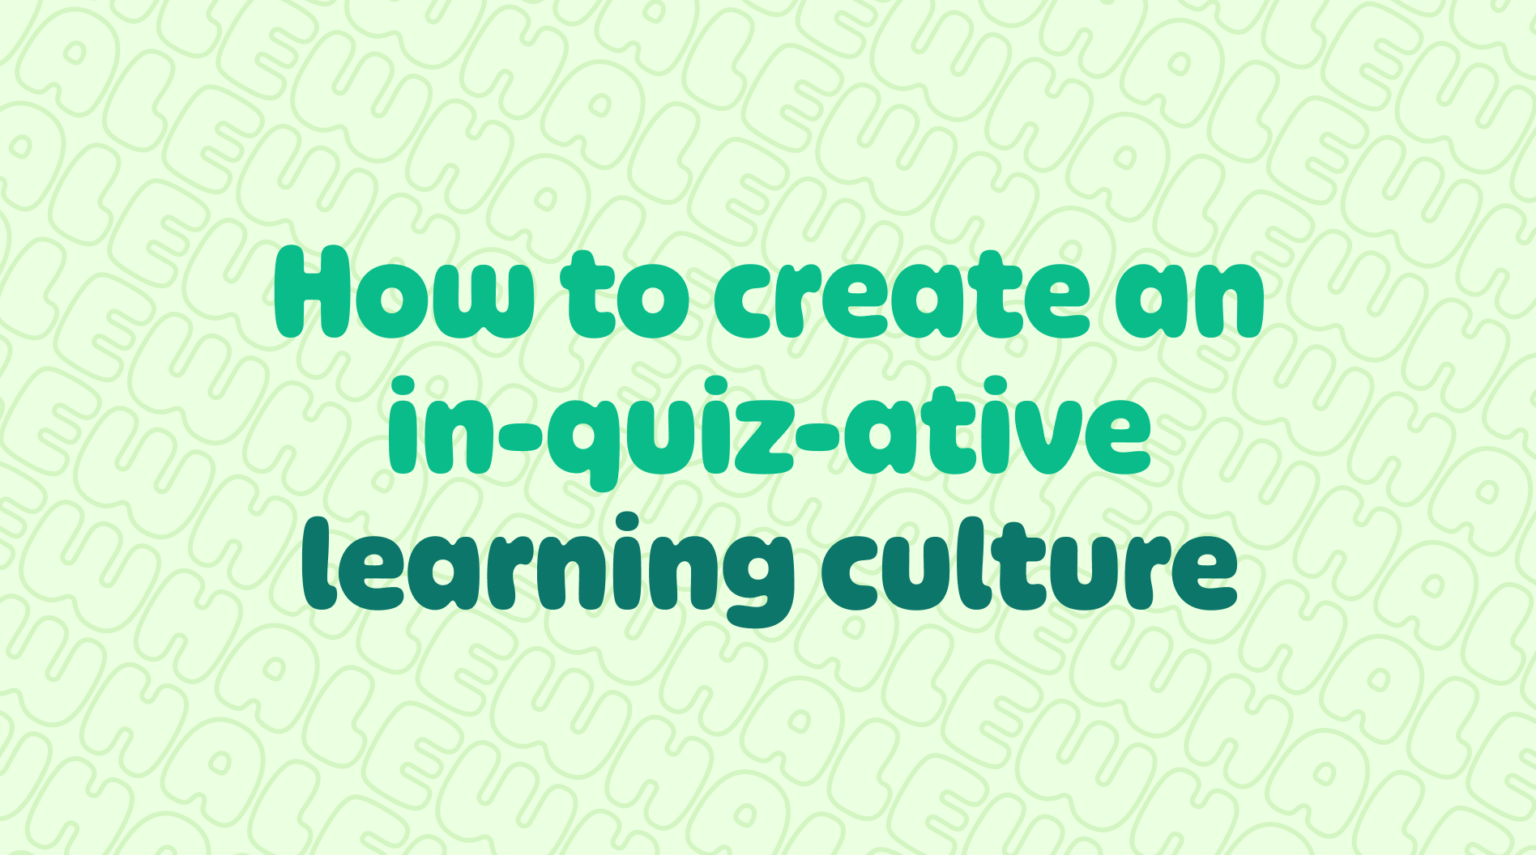 Creating a curious and inquiring environment to foster a learning culture.